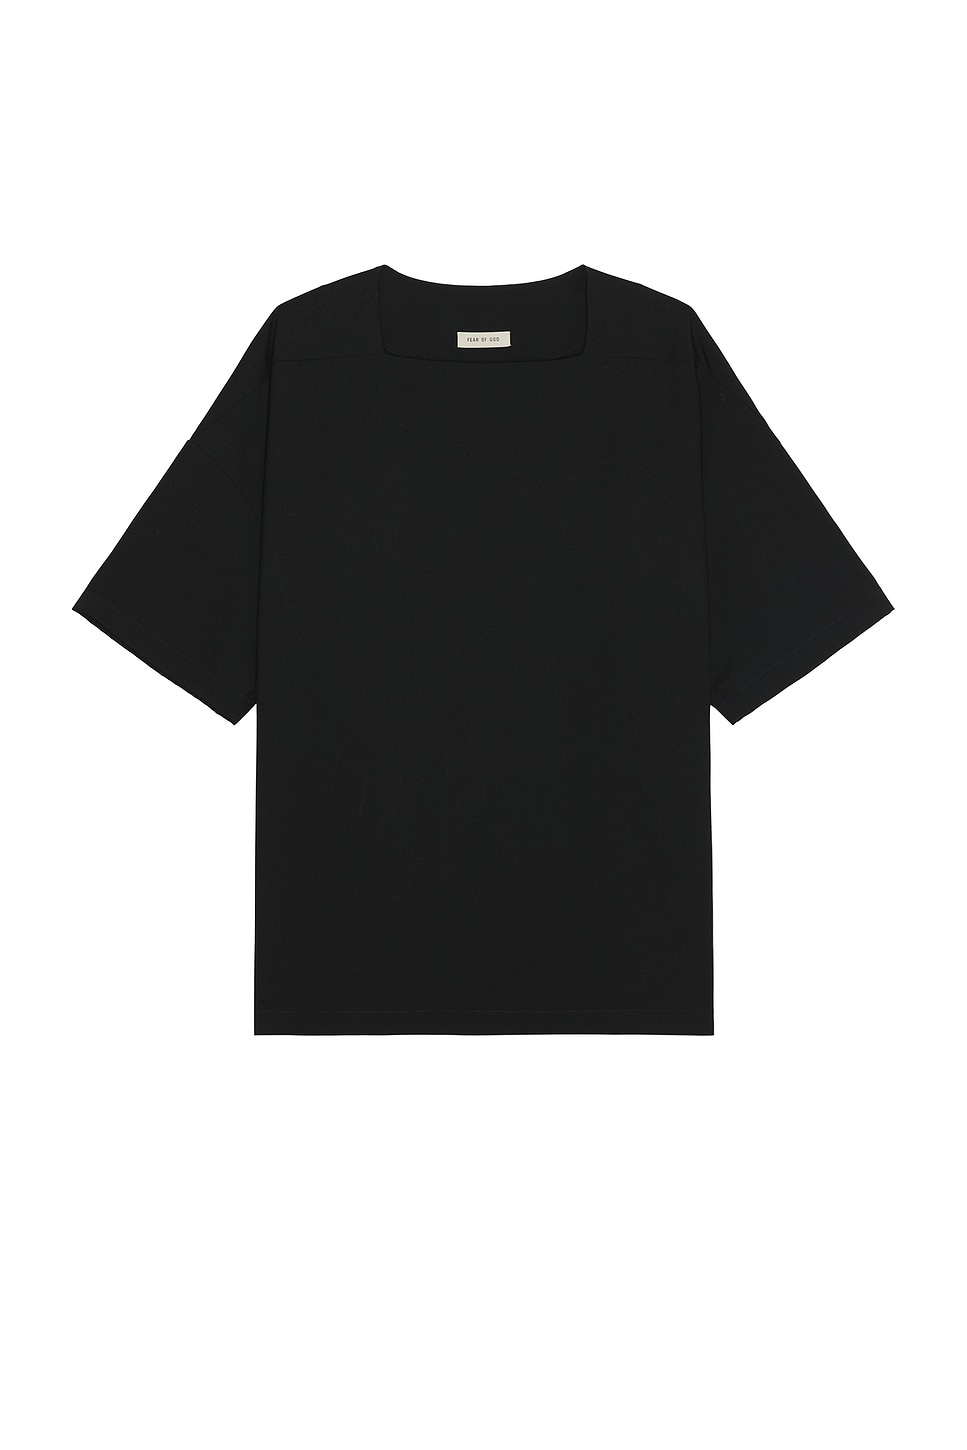 Image 1 of Fear of God Straight Neck SS Top in Black